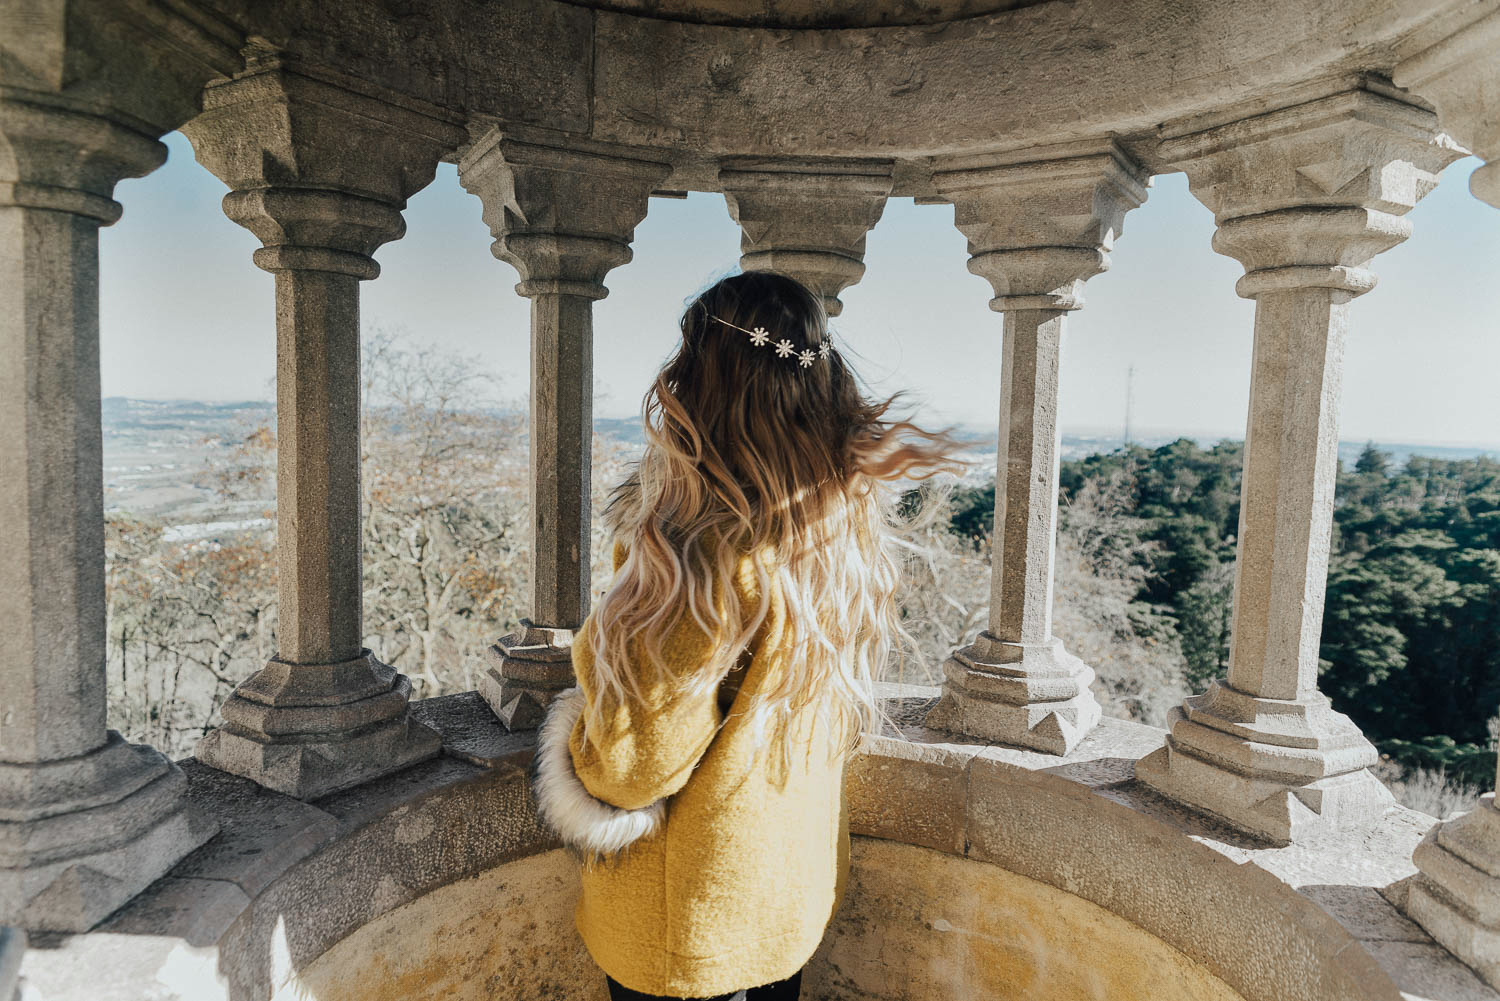 Adaras wearing a hair crown at Pena Palace in Sintra